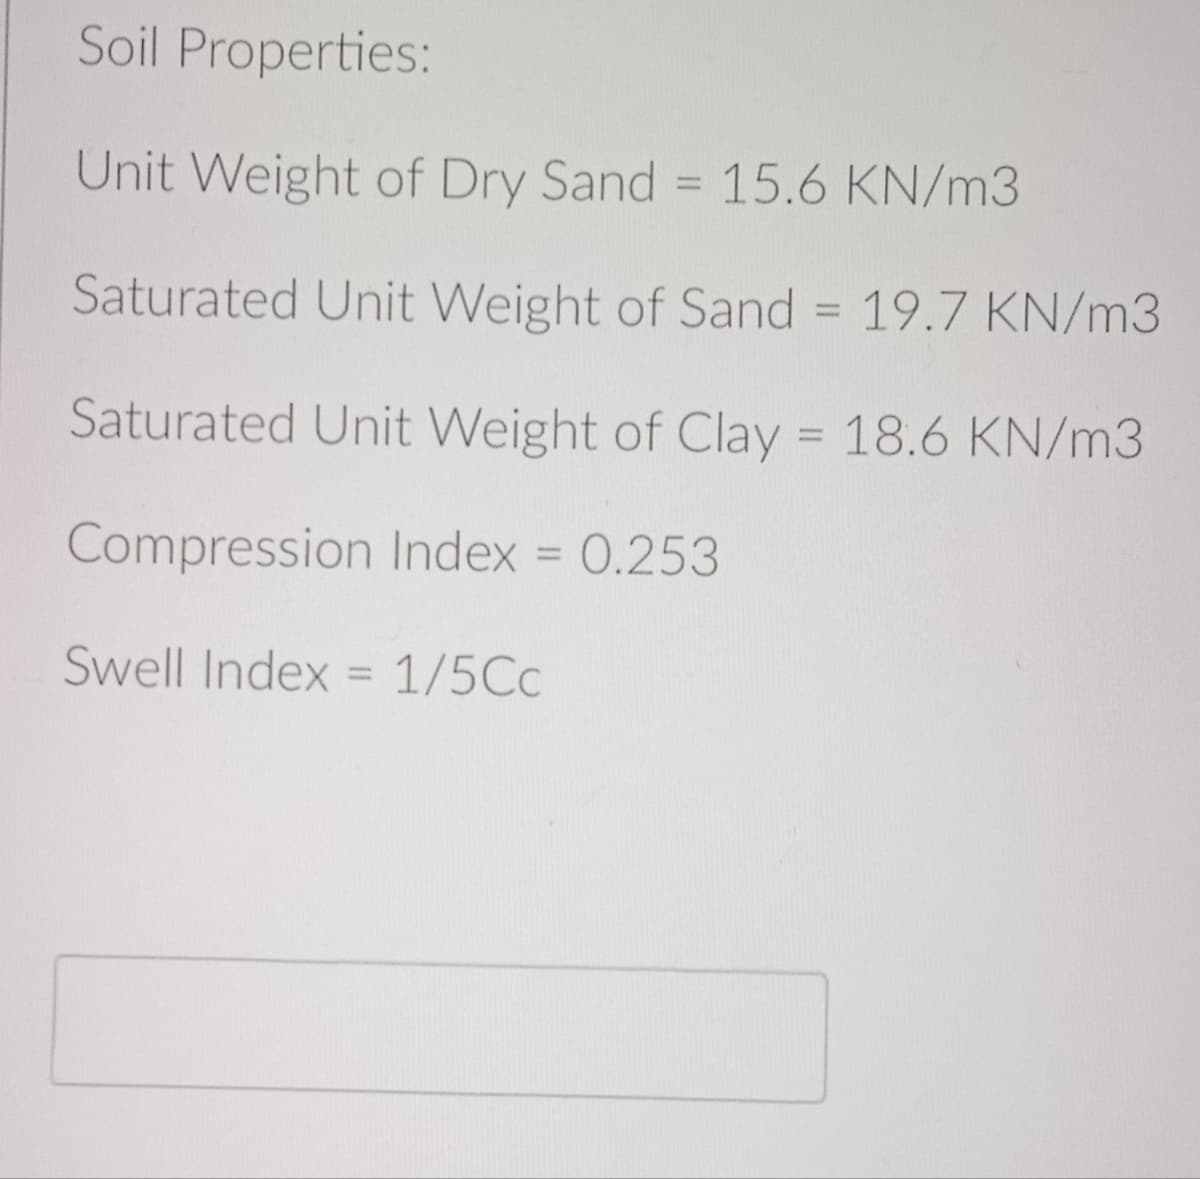 Soil Properties:
Unit Weight of Dry Sand = 15.6 KN/m3
Saturated Unit Weight of Sand = 19.7 KN/m3
Saturated Unit Weight of Clay = 18.6 KN/m3
Compression Index = 0.253
Swell Index = 1/5Cc